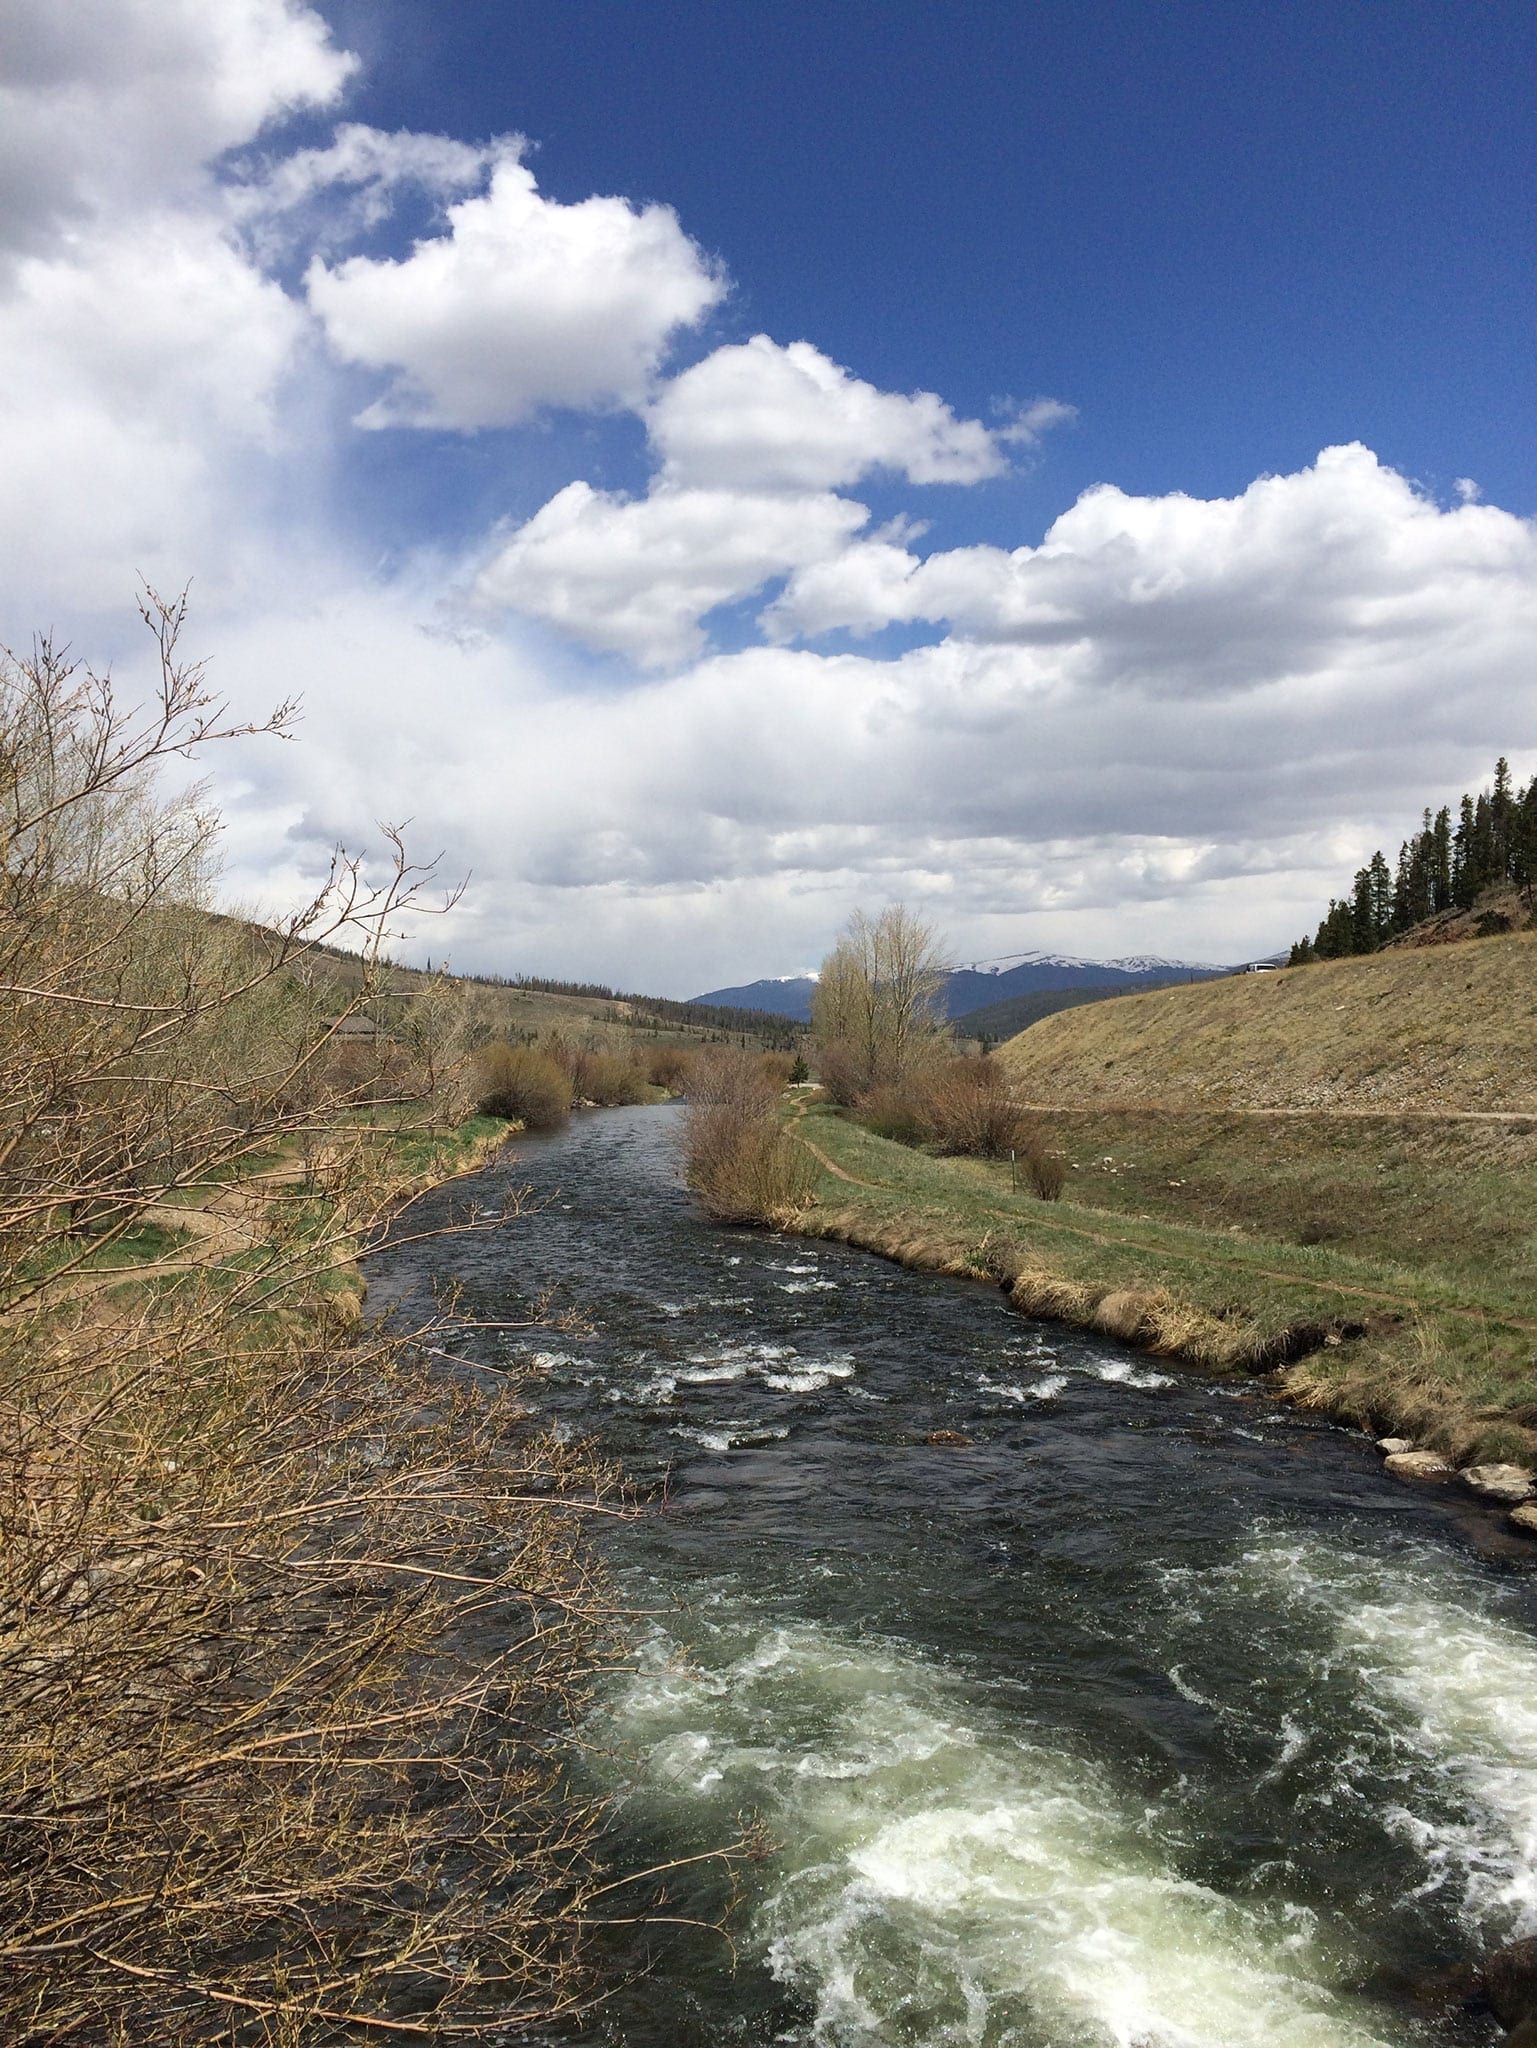 The River Trail follows the Blue River as it flows to the north of Breckenridge, and is one of the great spots for those people hiking in Breckenridge without a car.